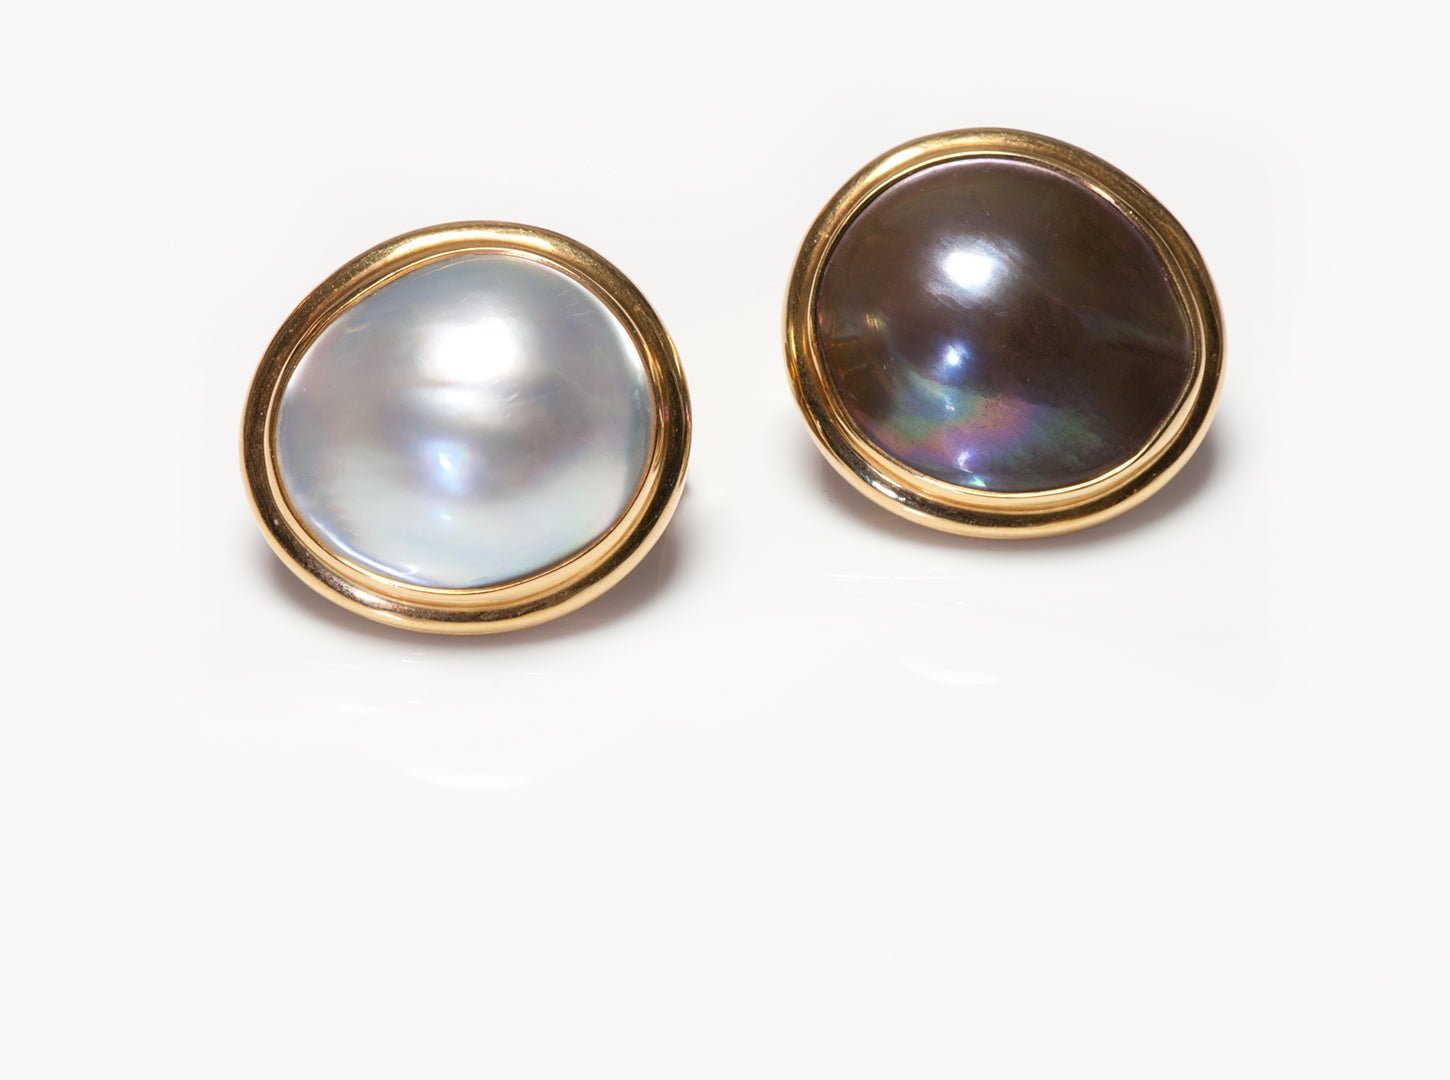 Vintage 18K Gold White & Grey Mabe Pearl Earrings